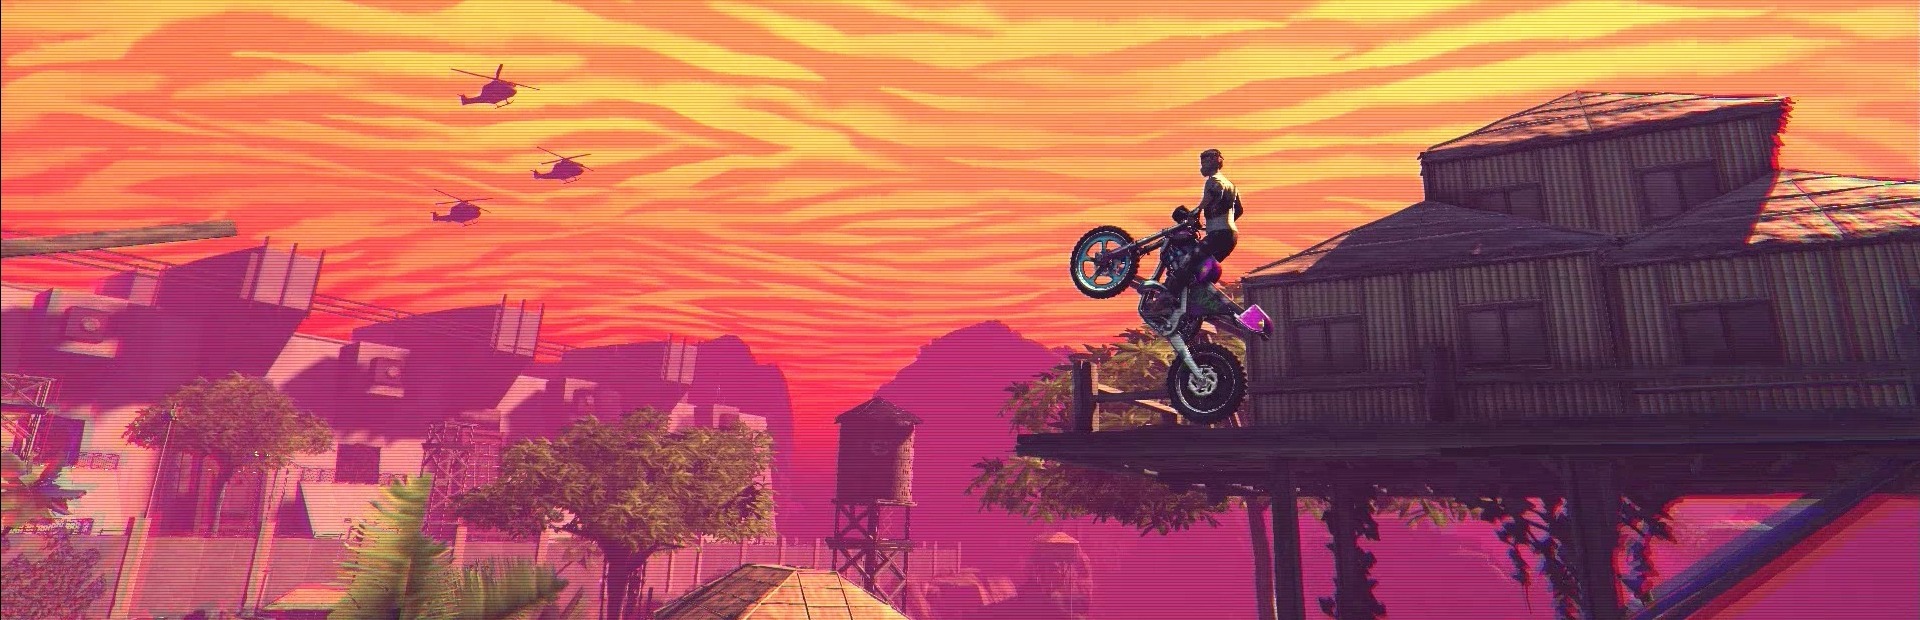 Trials of the Blood Dragon Review